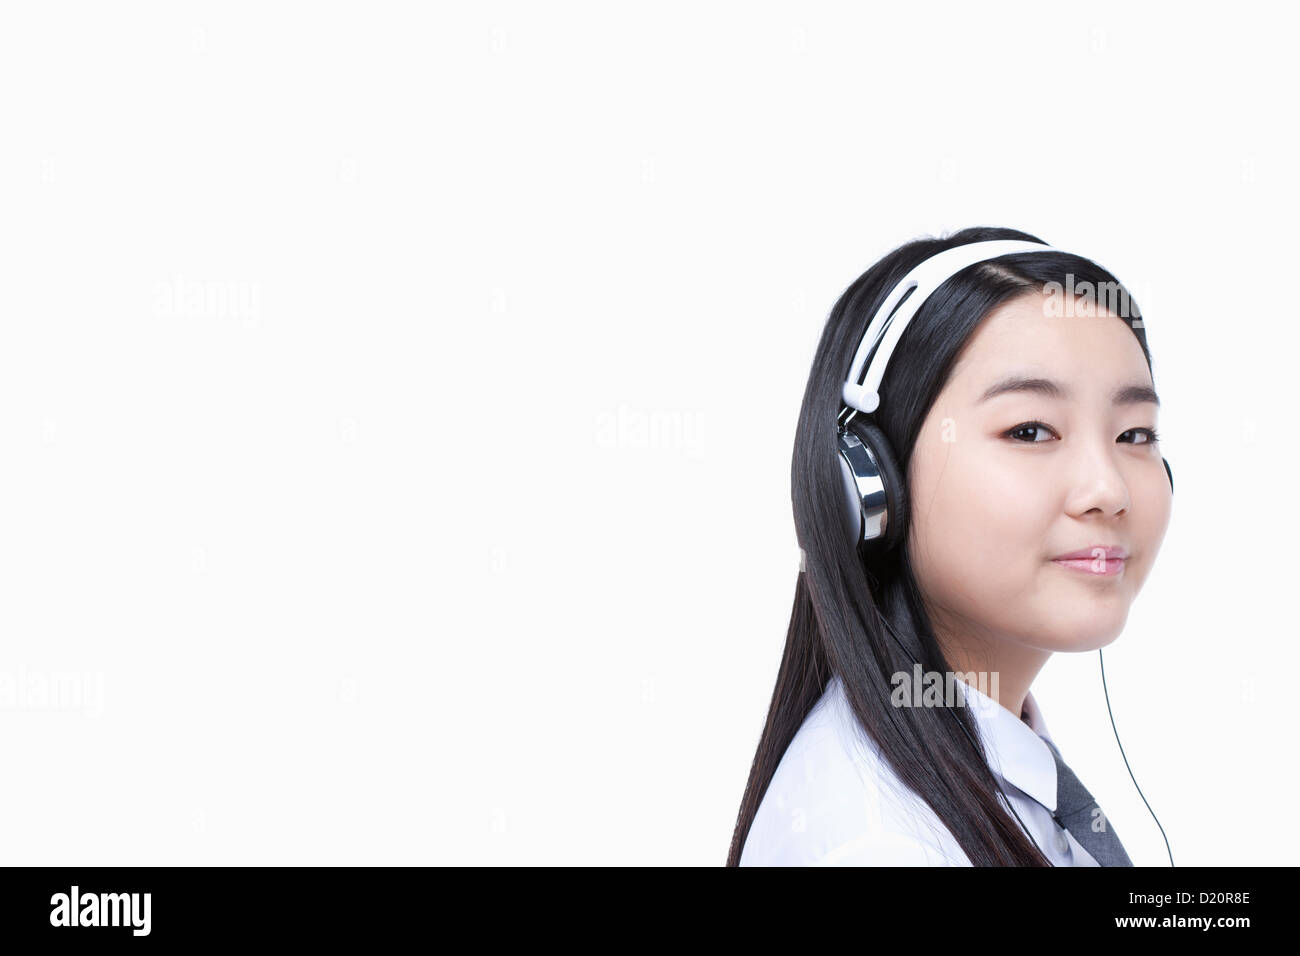 a female student wearing a headphone Stock Photo